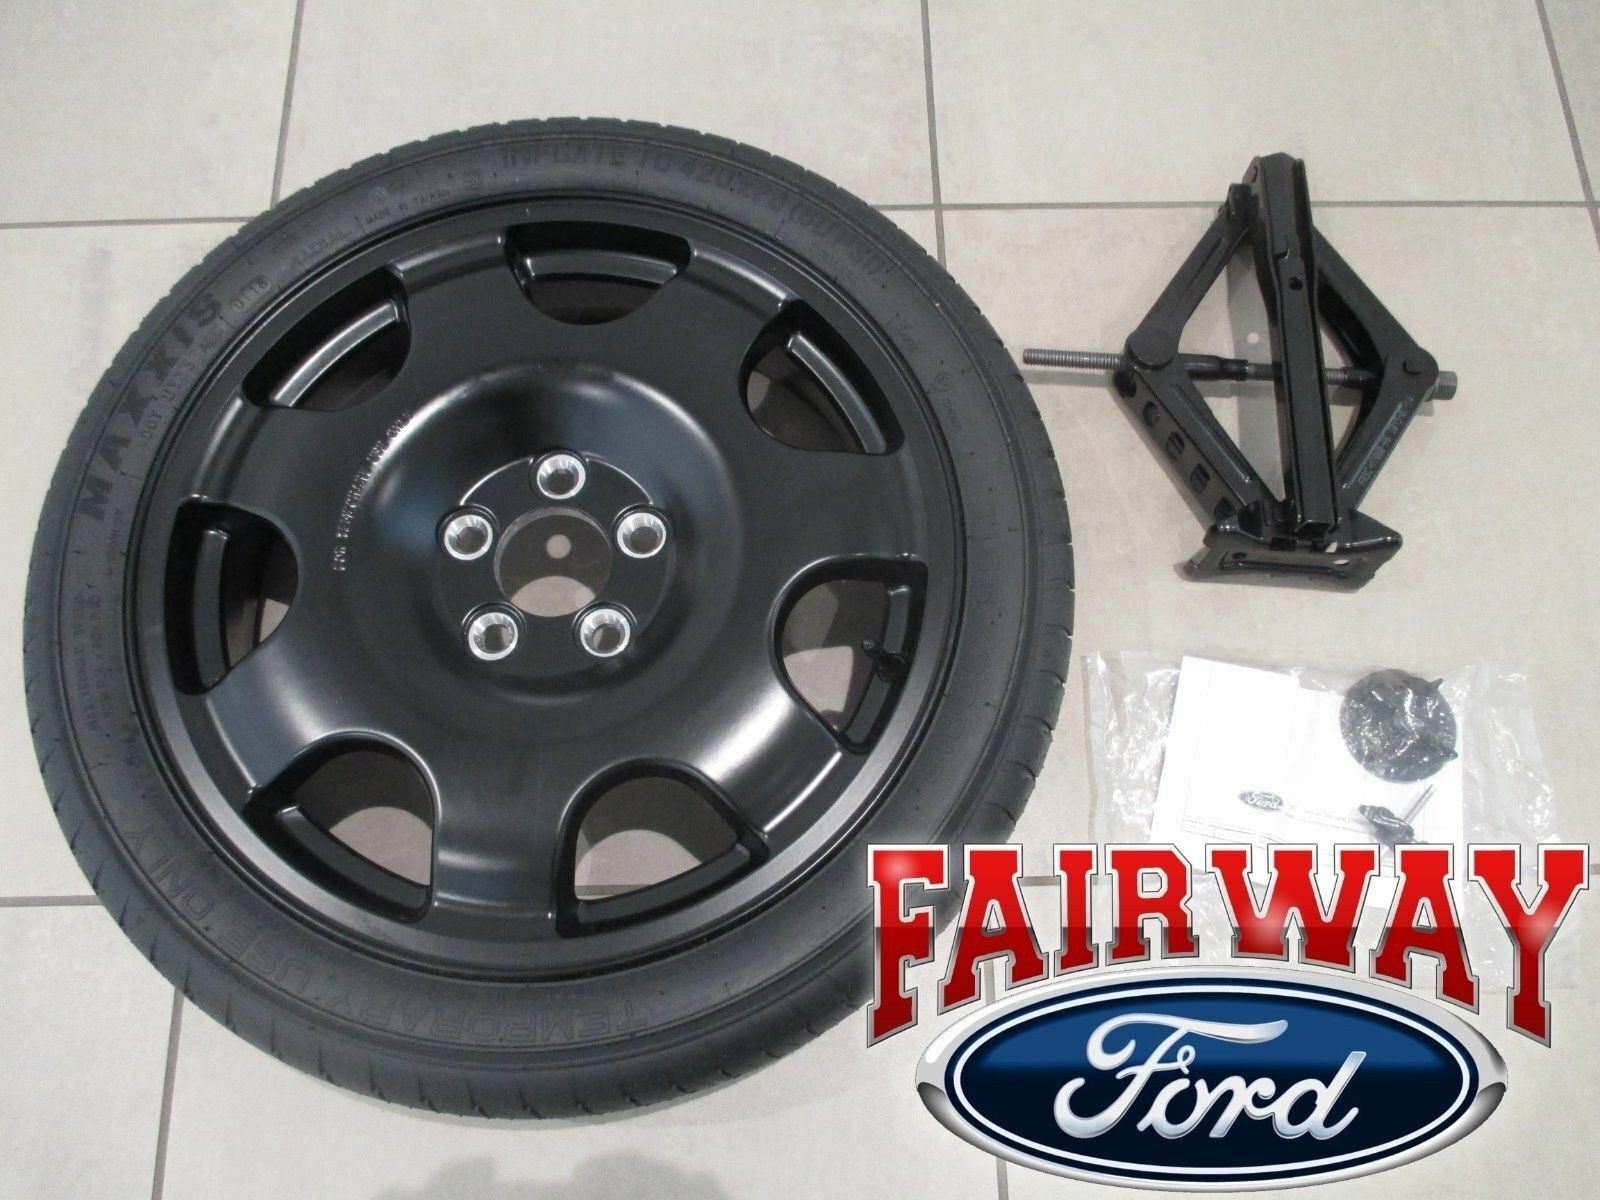 15 thru 22 Mustang OEM Genuine Ford Spare Wheel Tire Kit with Jack & Wrench NEW